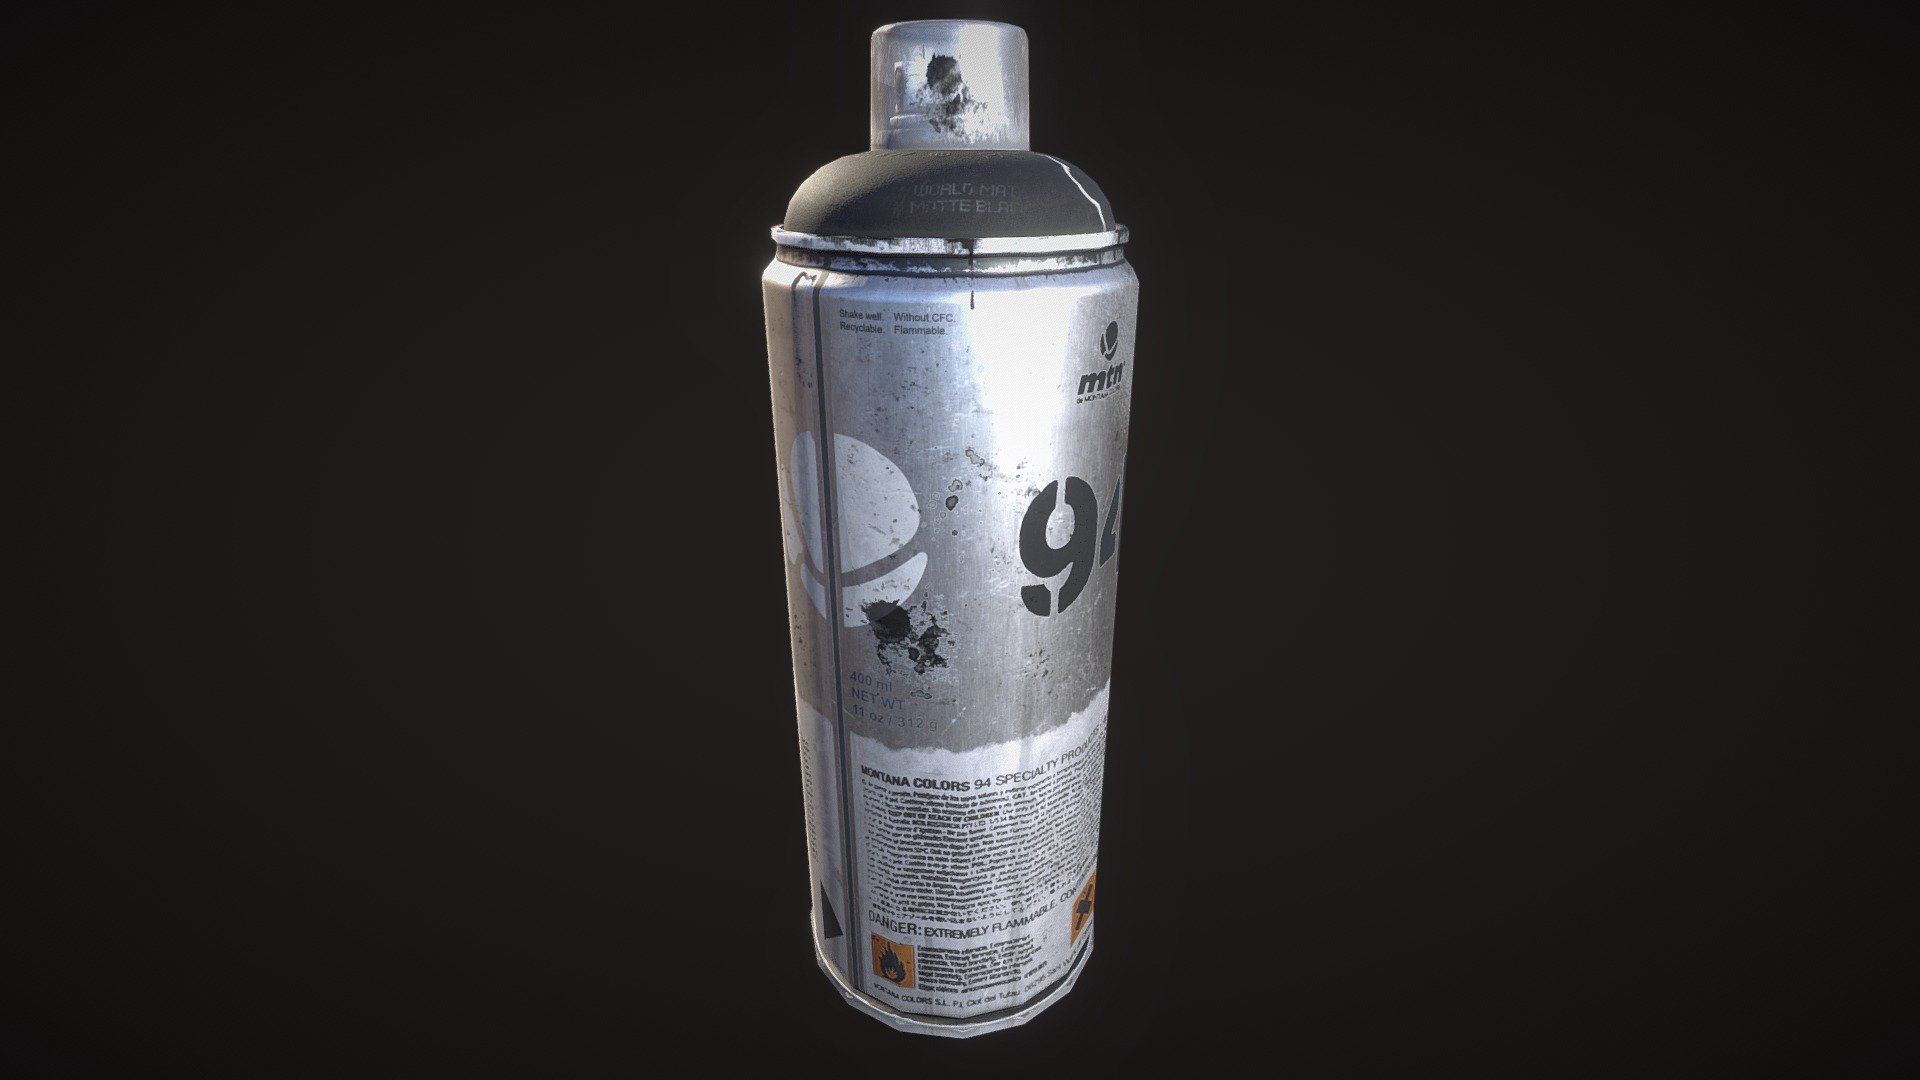 Low-poly game asset of a Montana Spray Can 94.
One material, texture set is 2048px wide.

Done with Maya, Photoshop and Substance Painter 3d model